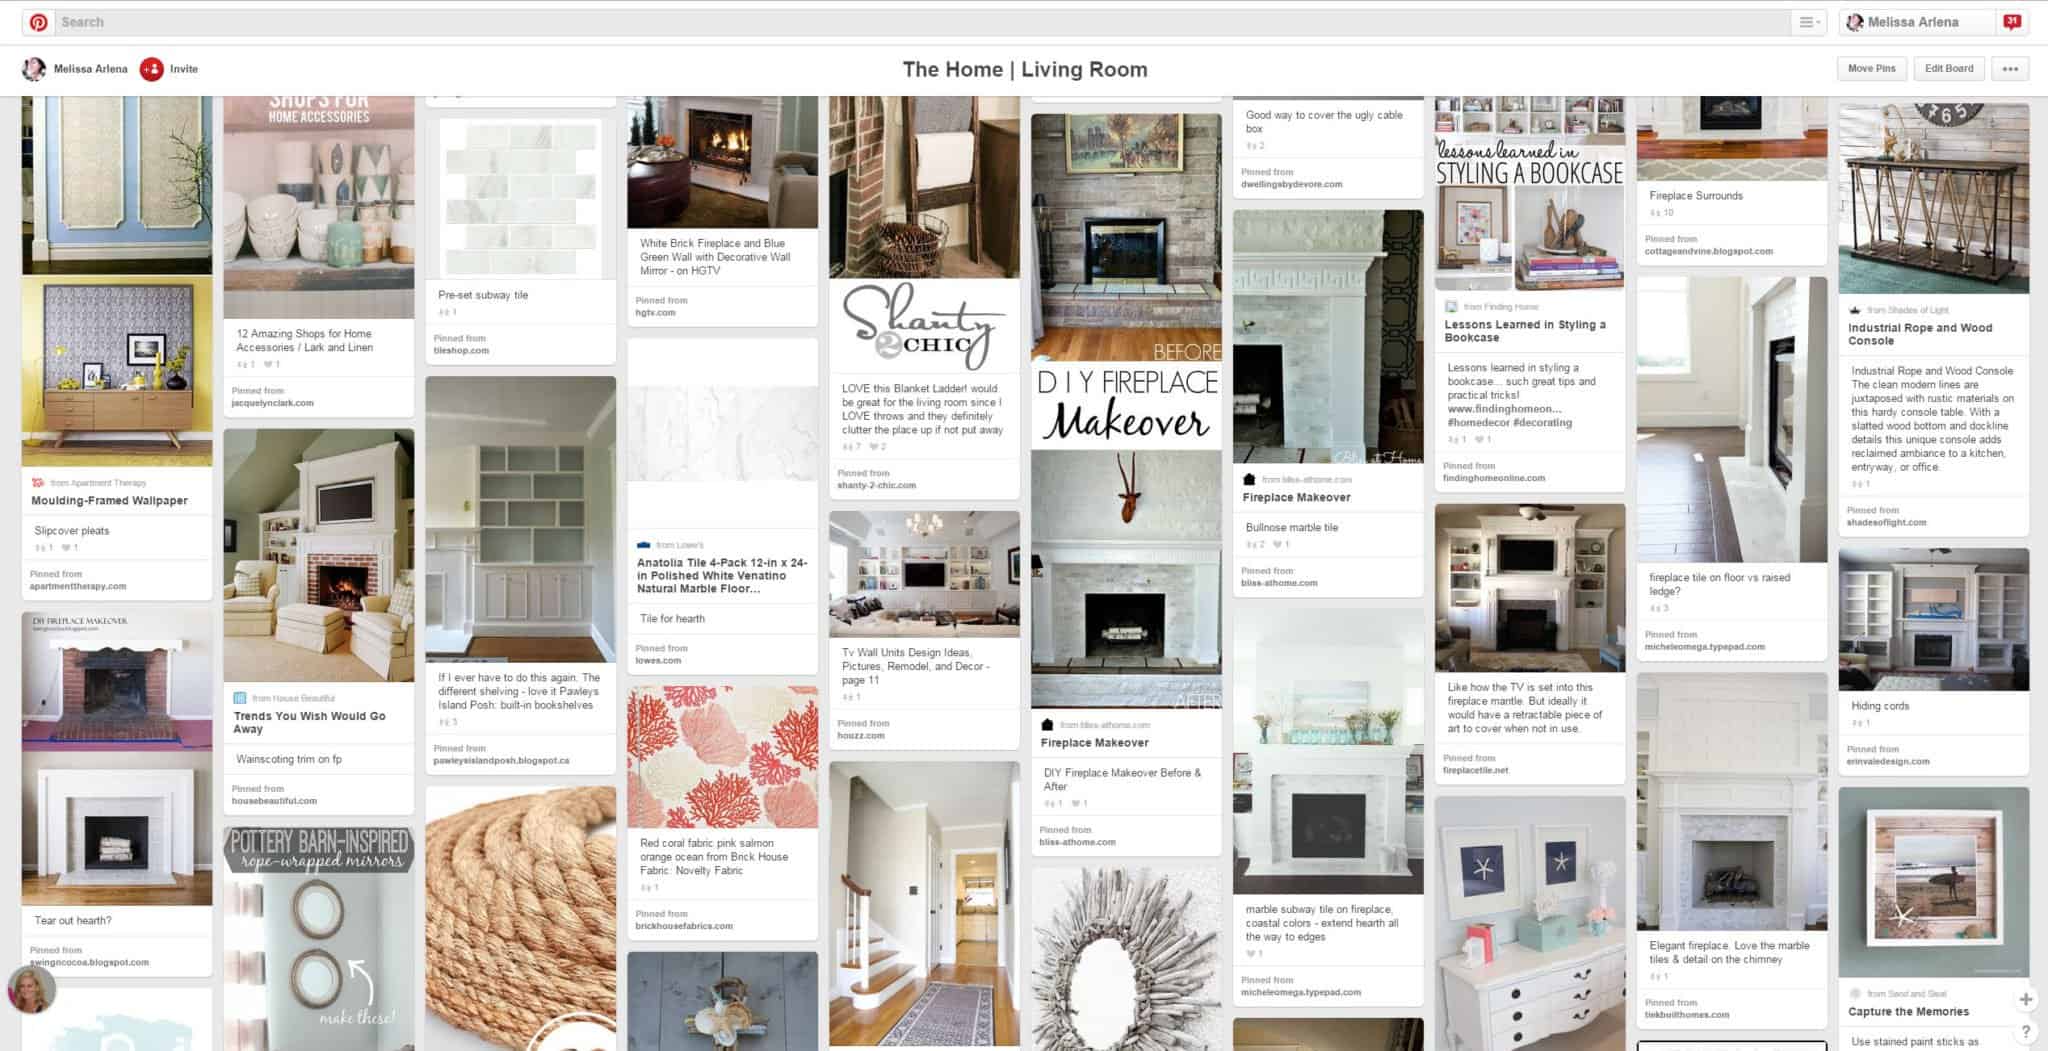 My Pinterest board inspiration for this project! I count 15 fireplace bookcase built in pins right here :).